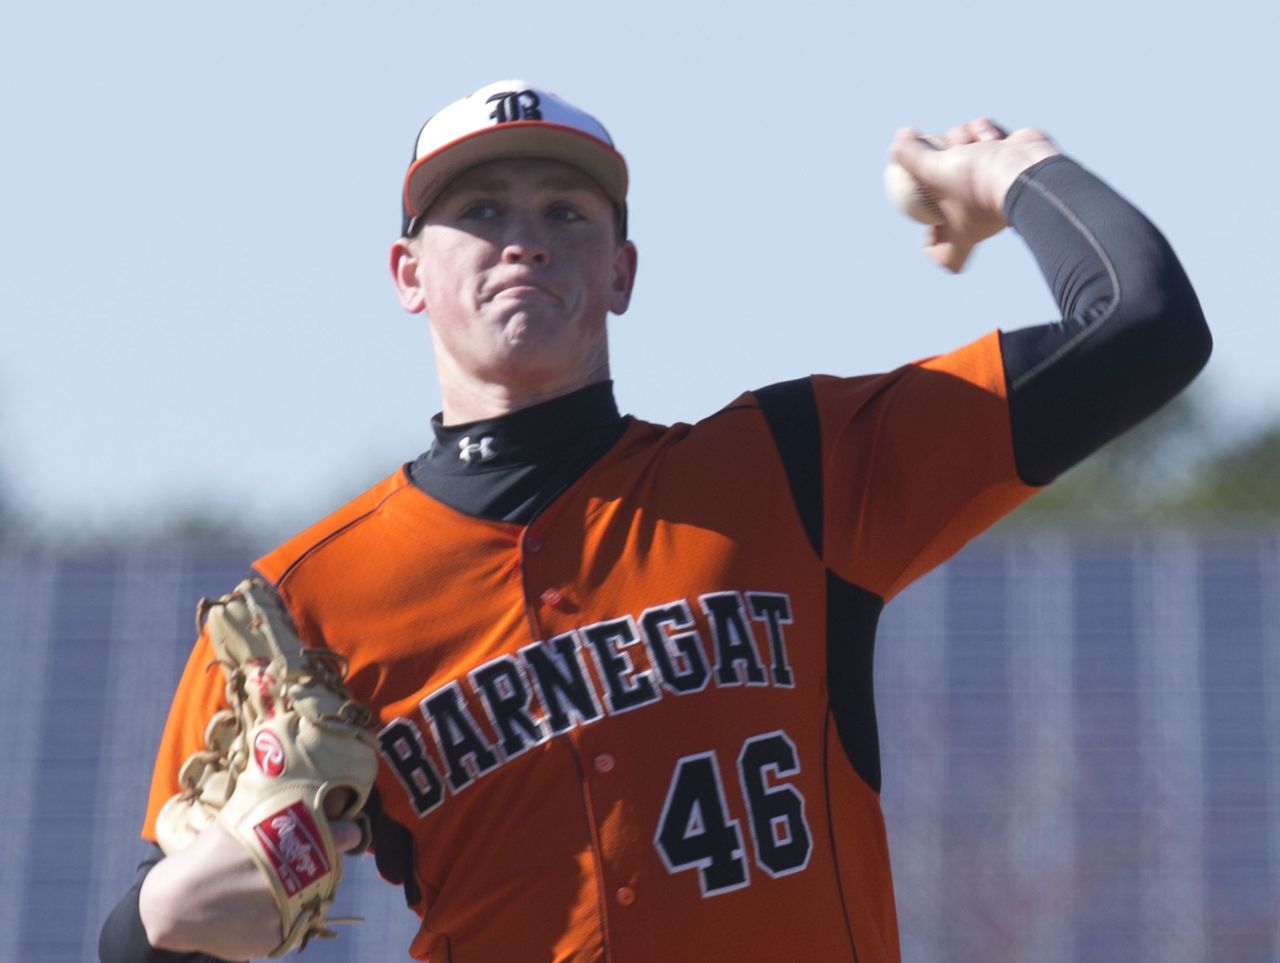 Barnegat’s Jason Groome fired a no-hitter and struck out 19 Monday afternoon against Central Regional (Photo: Doug Hood, Gannett New Jersey)